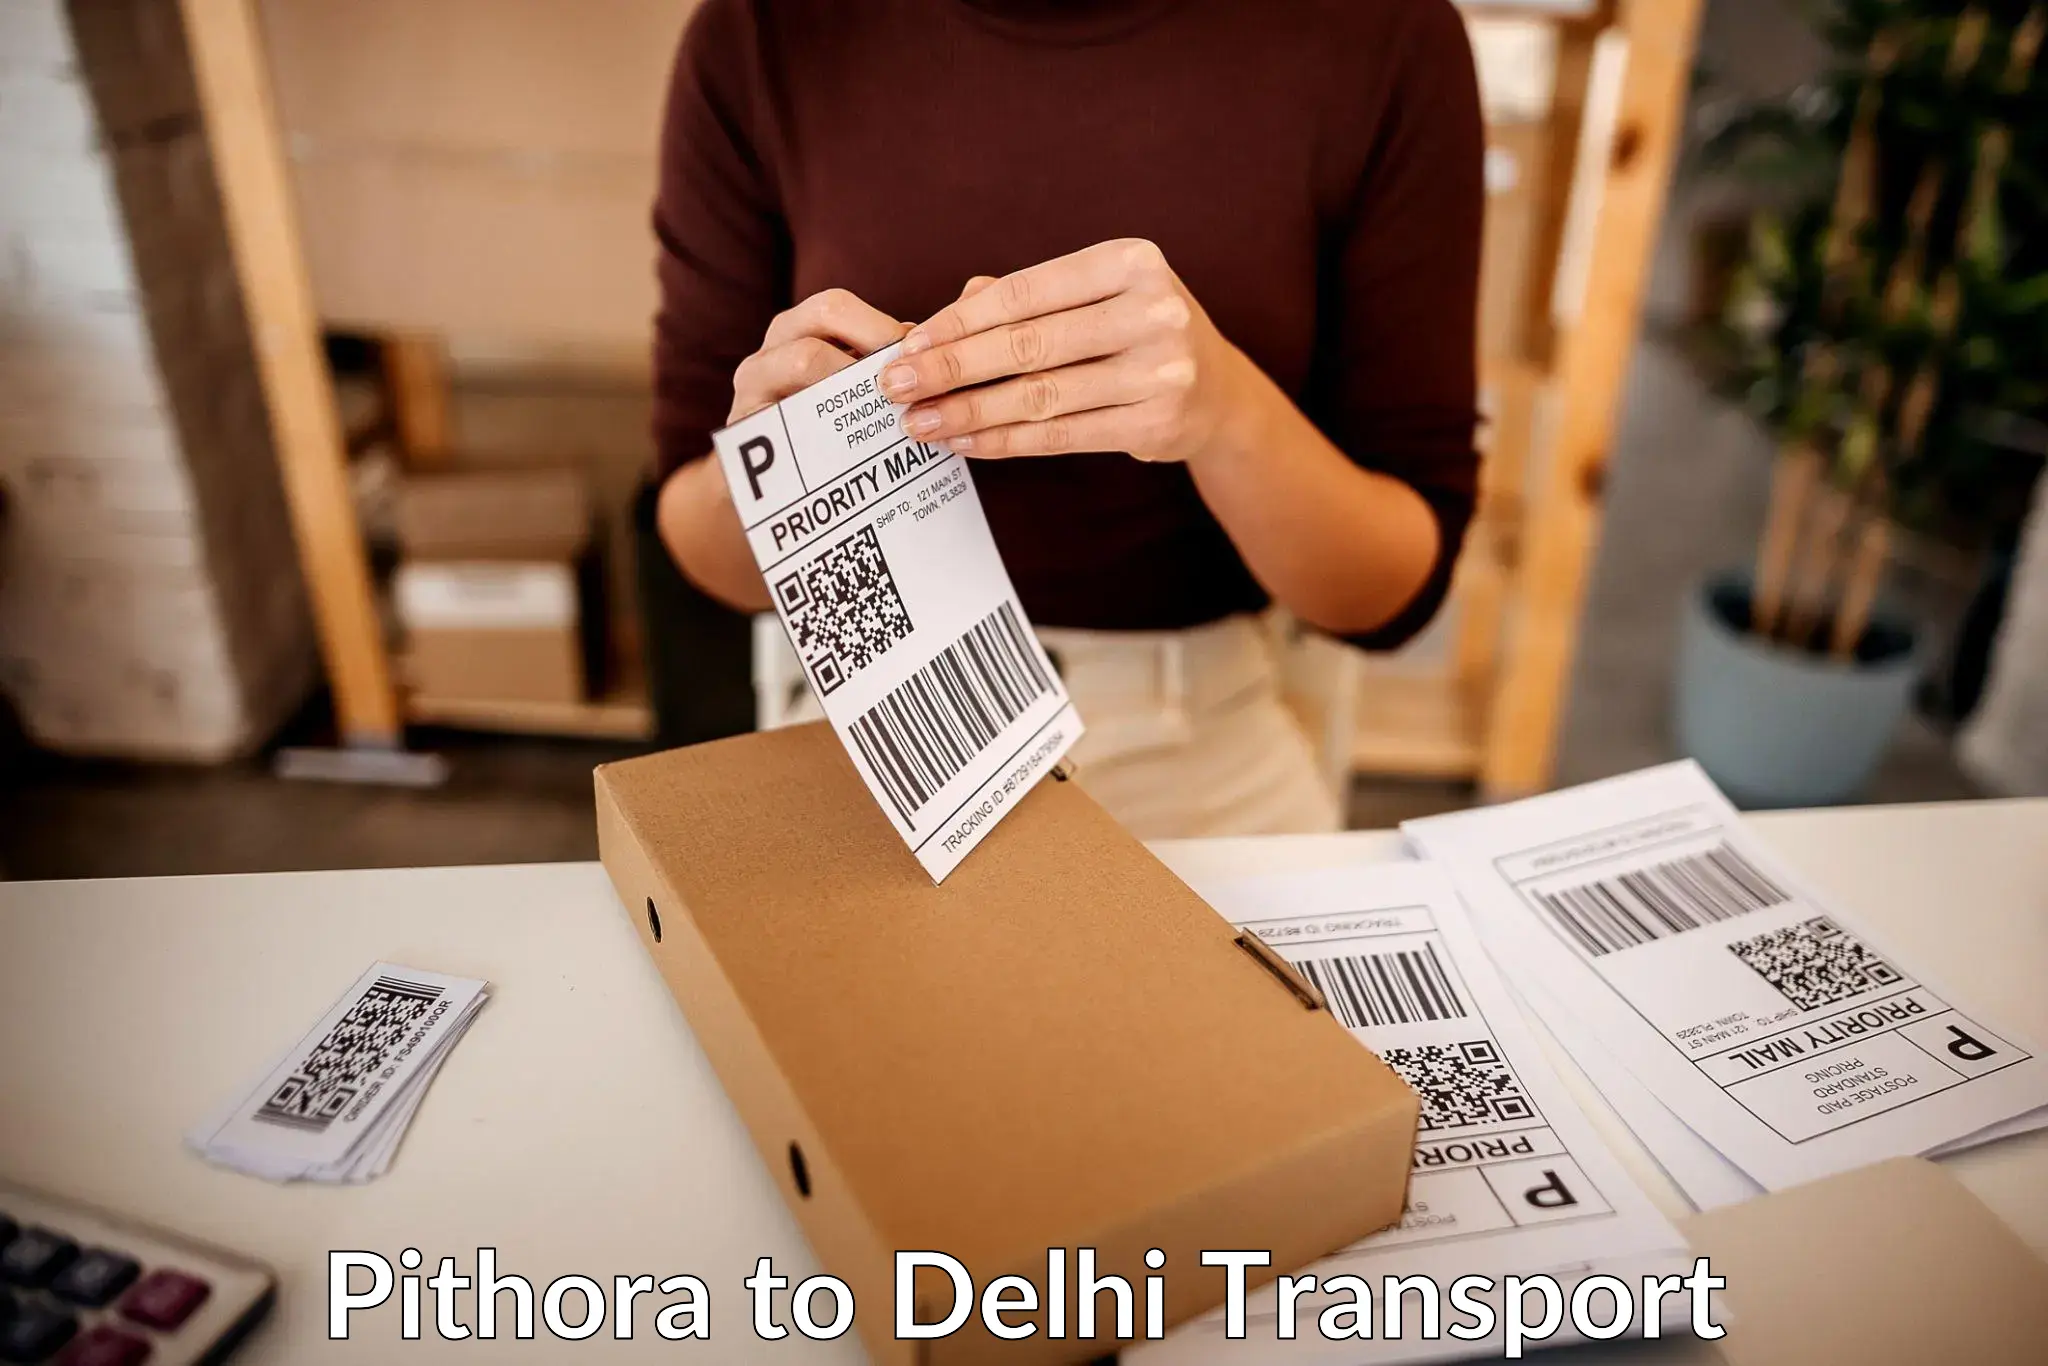 Nearest transport service Pithora to Lodhi Road